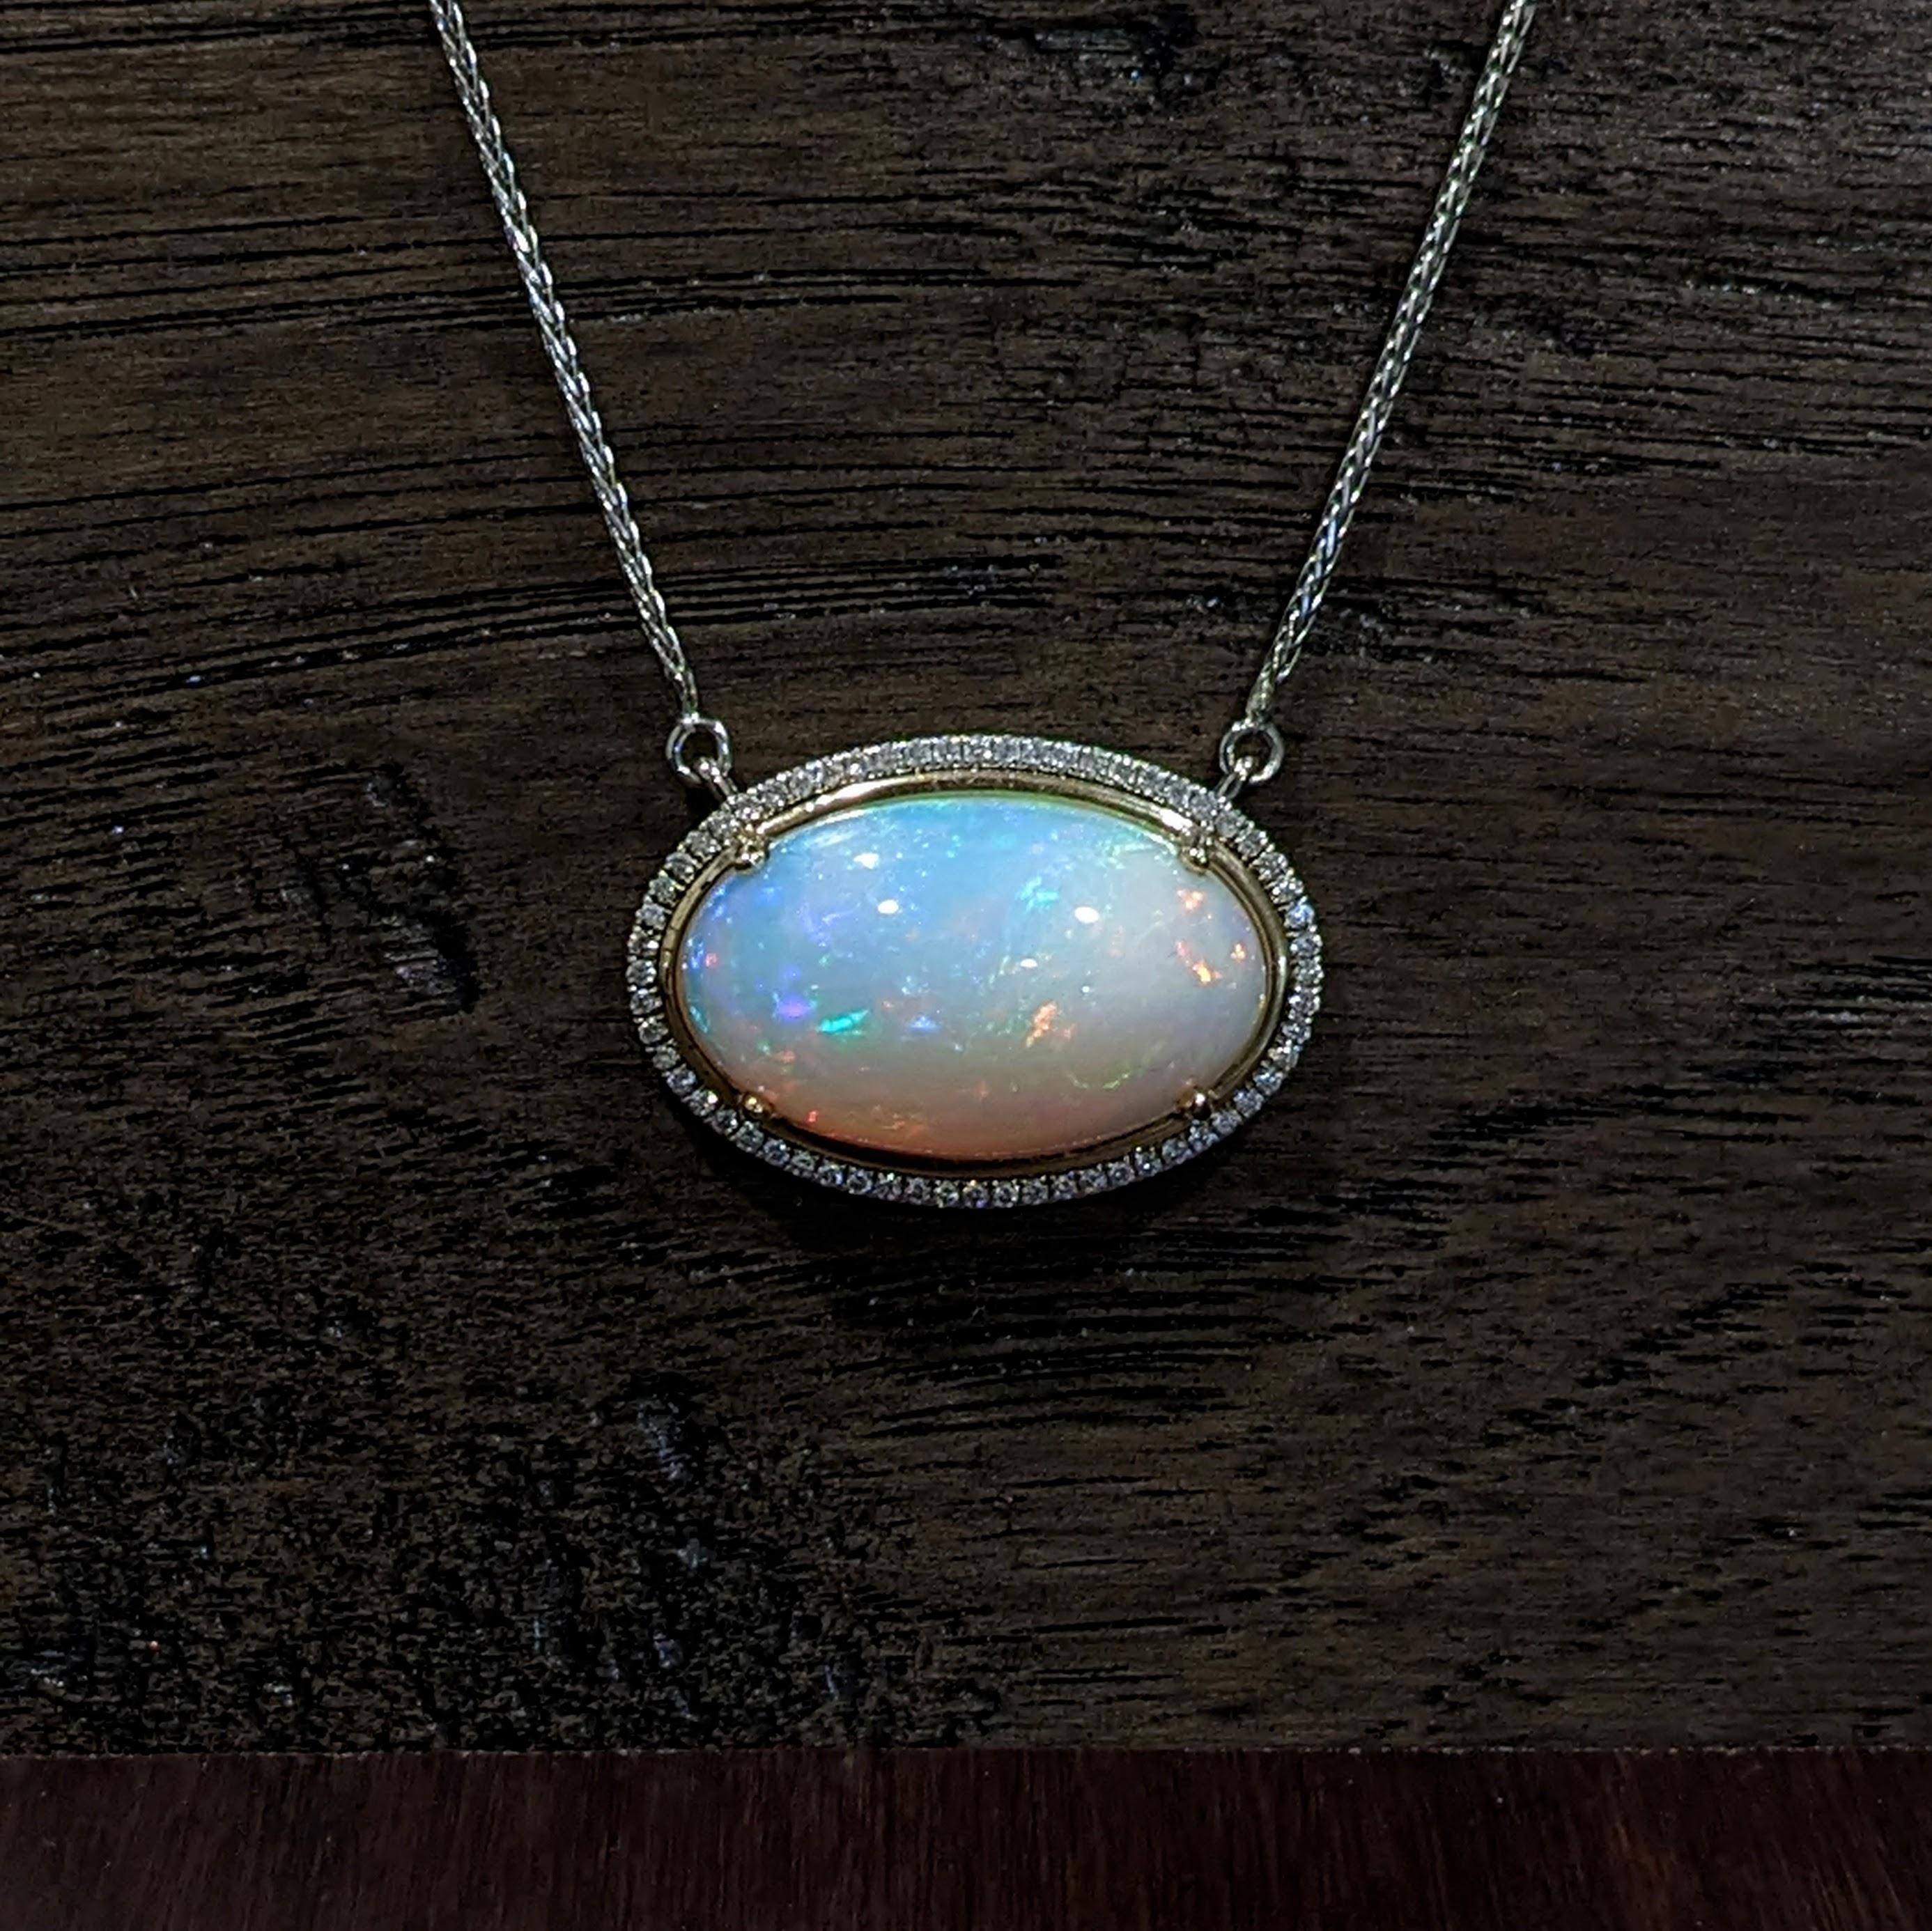 This gorgeous large Ethiopian Opal exhibits exquisite play of fire. It is set east west in a 14k dual tone yellow and white gold pendant setting with a natural diamond halo and attached 14k white gold chain.

Perfect for gifts, anniversaries, or any